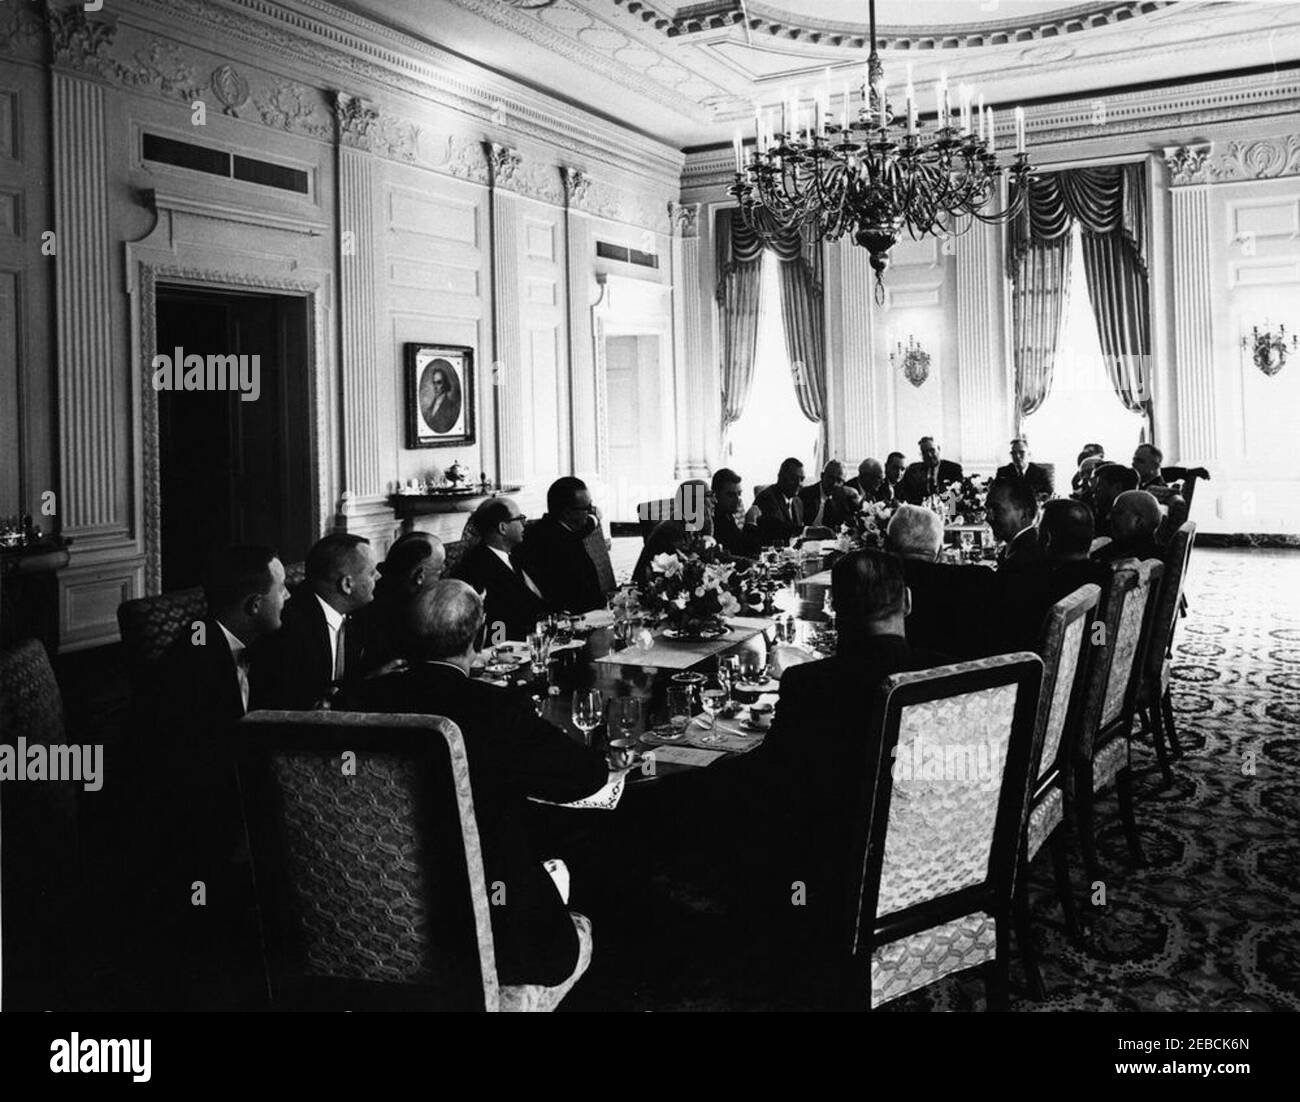 Luncheon for Michigan Editors u0026 Publishers, 1:00PM. President John F. Kennedy and White House Press Secretary Pierre Salinger attend a luncheon for Michigan newspaper editors and publishers in the State Dining Room, White House, Washington, D.C. Guests include: Stanley R. Banyon; W.A. Butler; Harold A. Fitzgerald; J.S. Gray; Martin S. Hayden; Lee Hills; J.A. McDonald; Mark T. McKee, Jr.; Philip F. Miller; Robert B. Miller; George A. Osborn; Longworth Quinn; John u201cJacku201d Rice; Philip T. Rich; Phil Richards; Vidian Roe; Walter Rummel; Dale Stafford; James M. Tagg; F. Granger Weil; Stock Photo